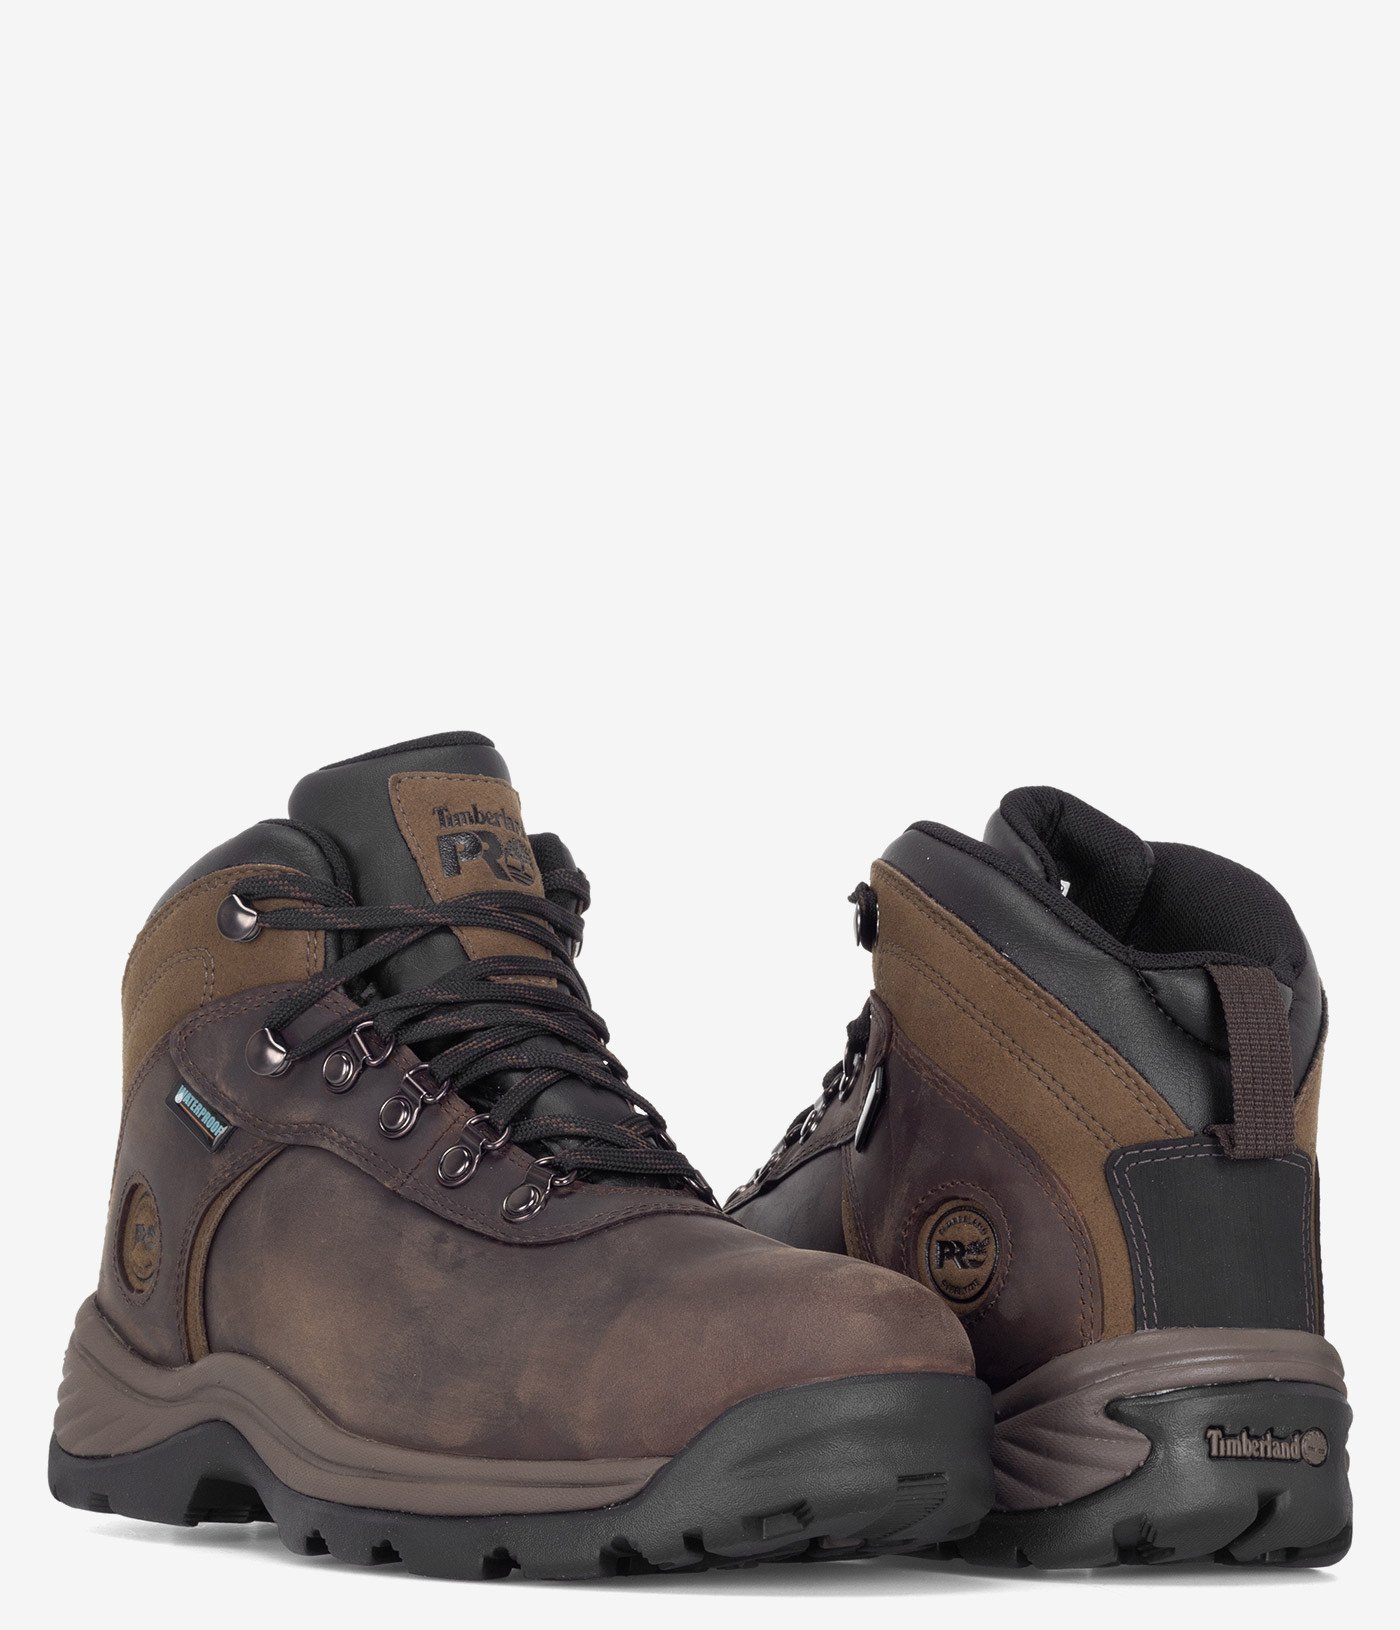 Timberland PRO Flume Waterproof Safety Toe EH Boot